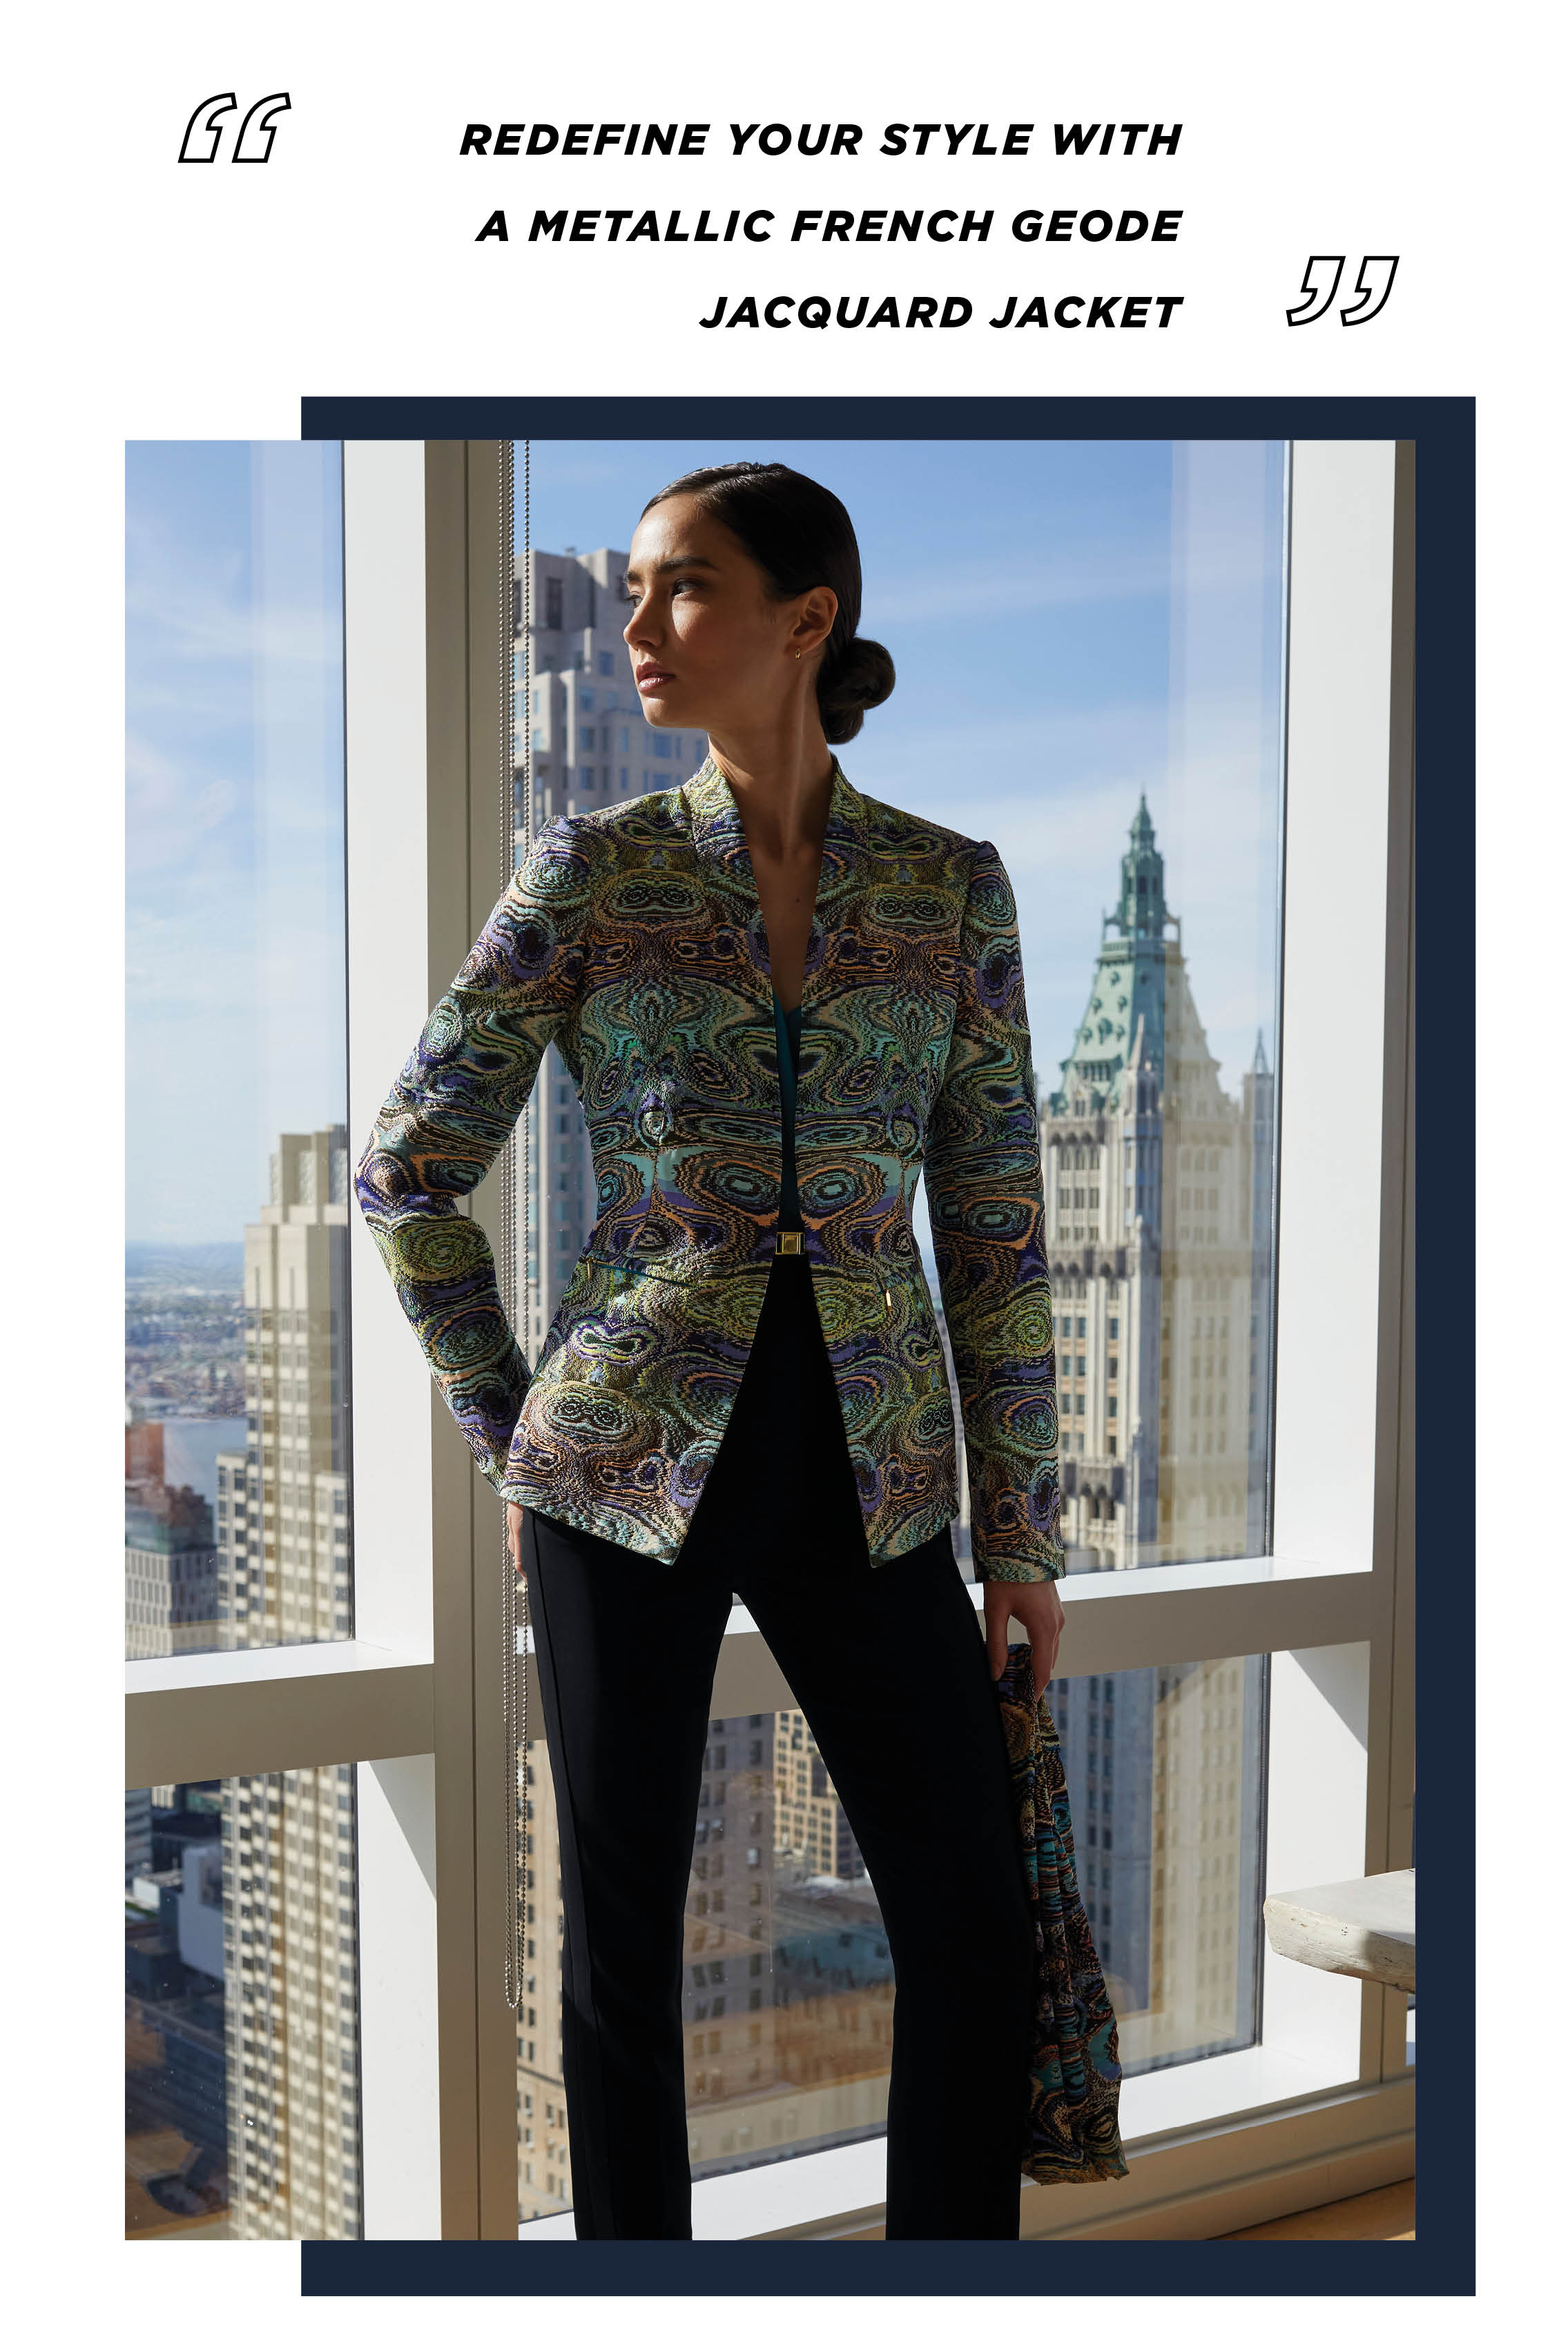 This French metallic jacquard jacket captures the romance of a precious geode in a symmetrical display of eight saturated shades. One of the colors is azulite, a rare gemstone, which is also found in this sweater shell of pure cashmere.